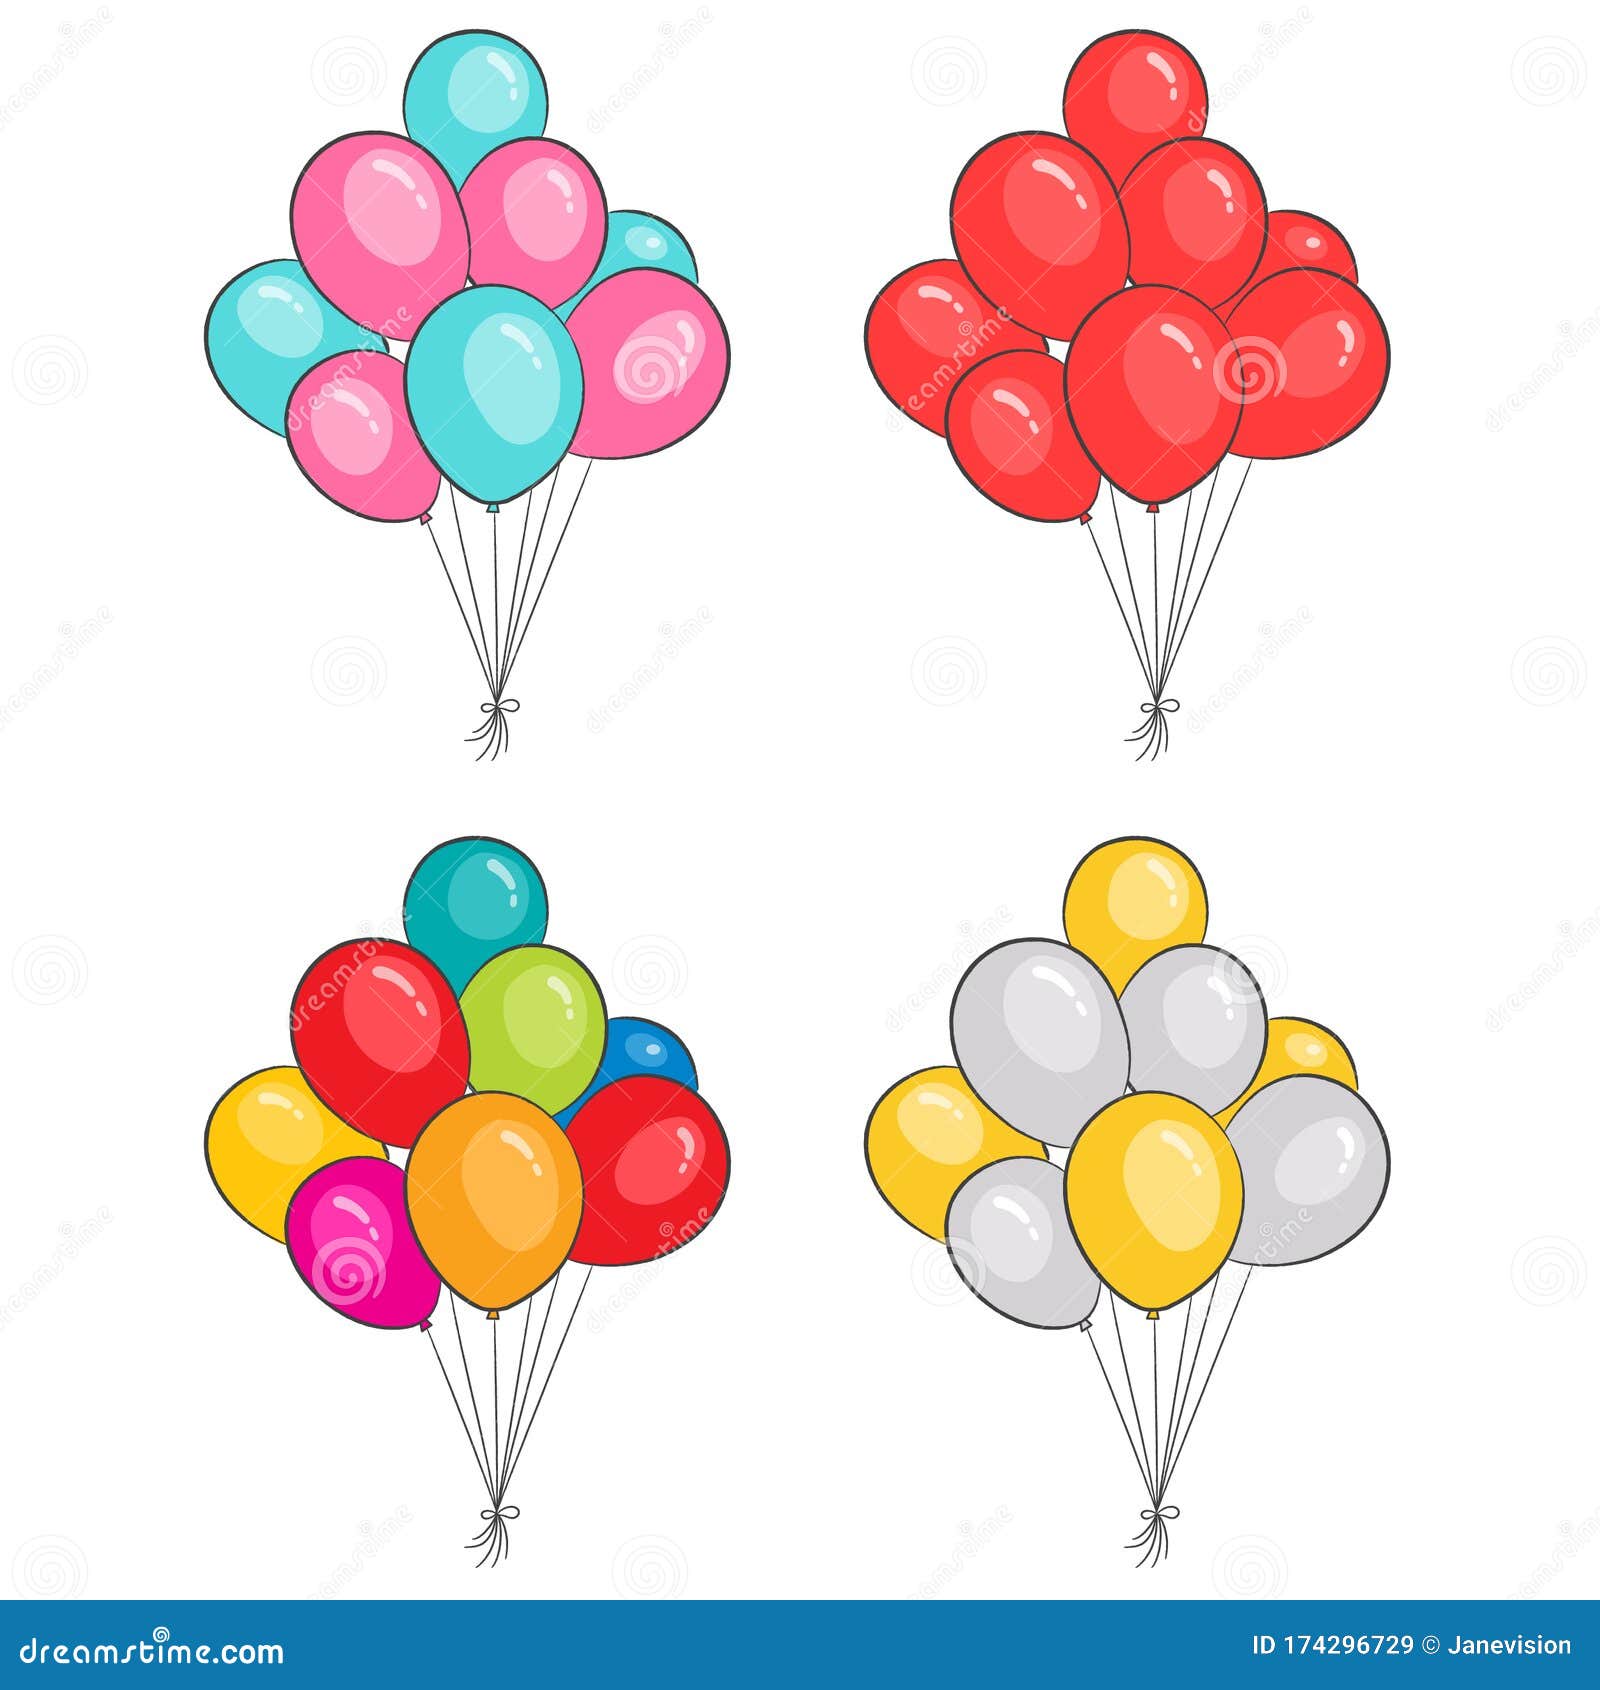 41,441 Balloon Strings Royalty-Free Images, Stock Photos & Pictures